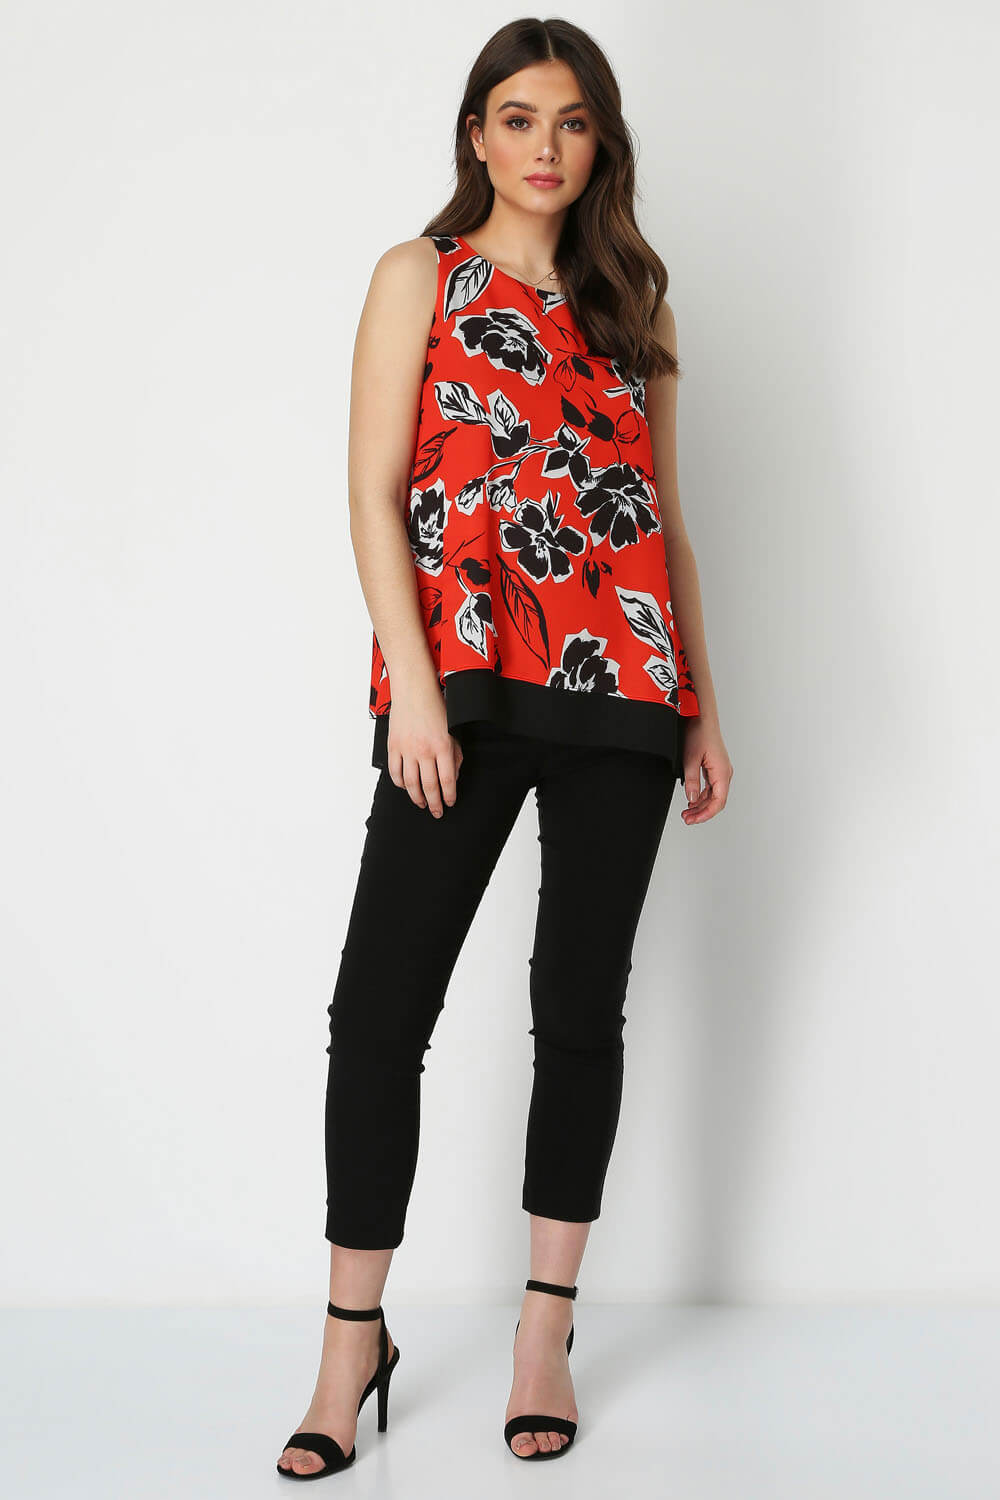 Red Sleeveless Floral Contrast Top, Image 2 of 8